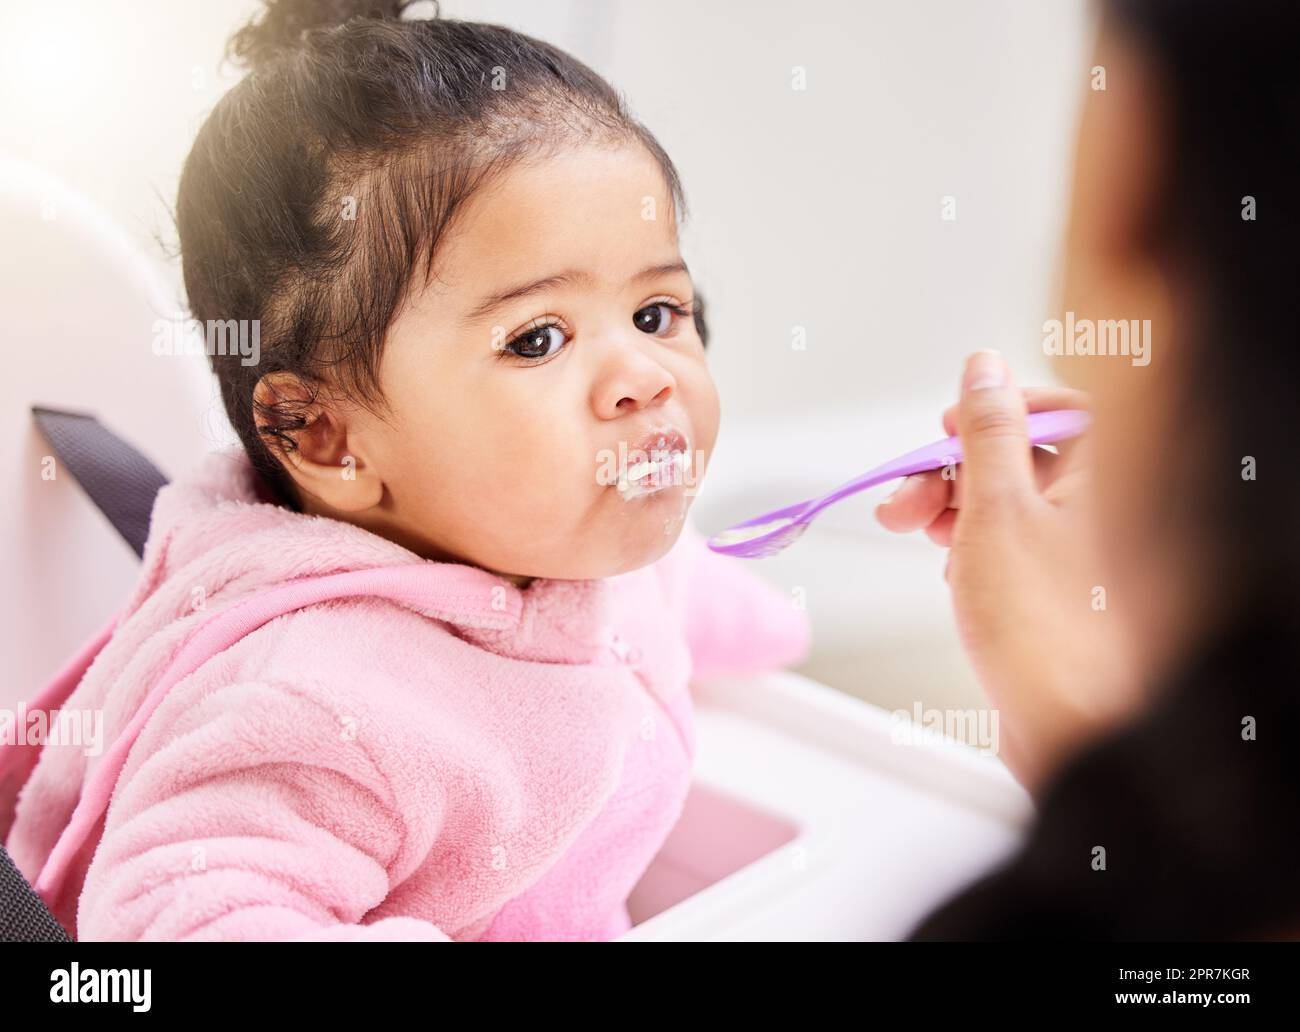 One mixed race baby girl being fed with a spoon by mom at home. Cute toddler with her mouth stuffed with porridge sitting in a feeding chair to enjoy some soft foods. Nutrition for healthy development Stock Photo